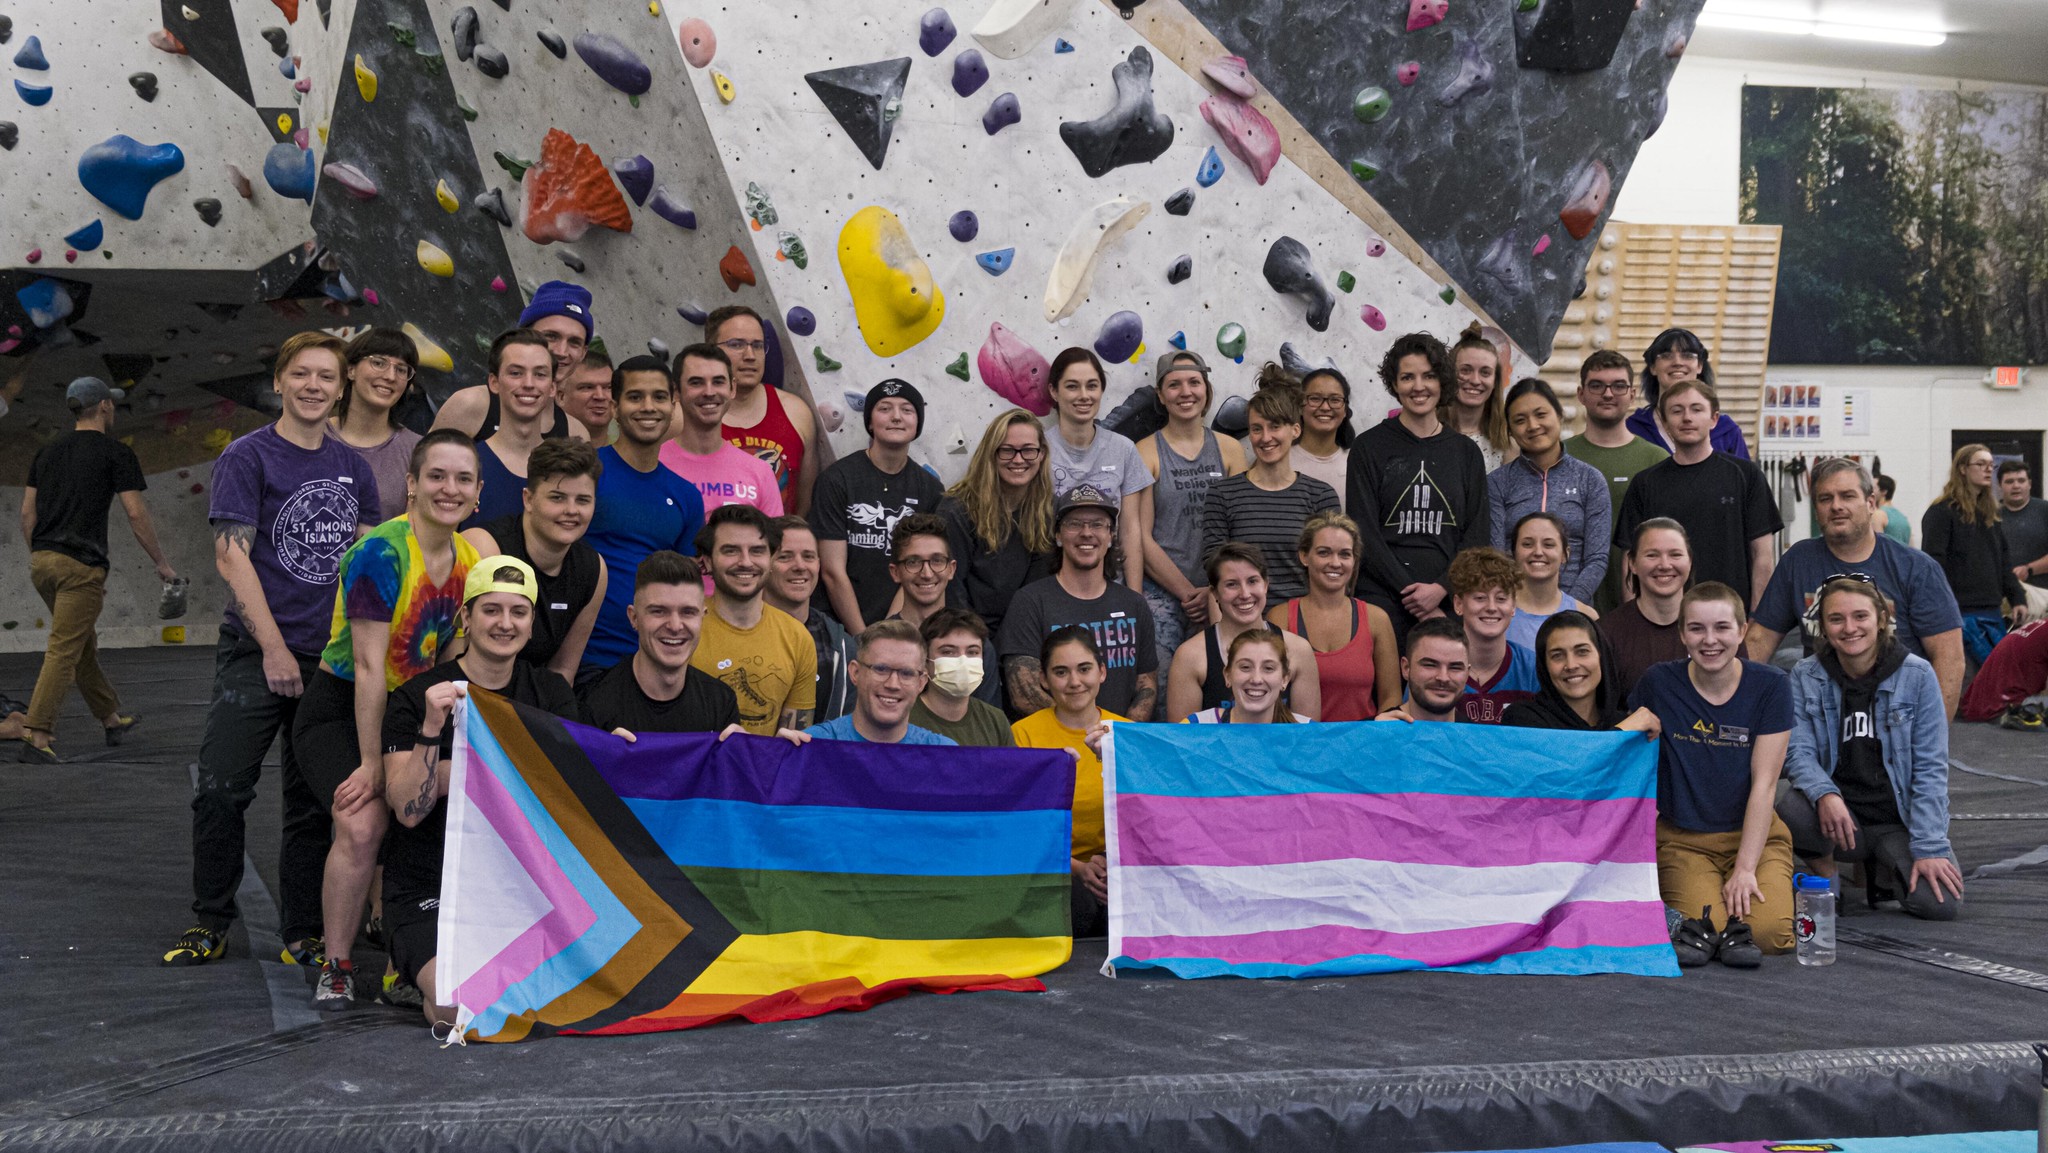 qcc event at a climbing gym